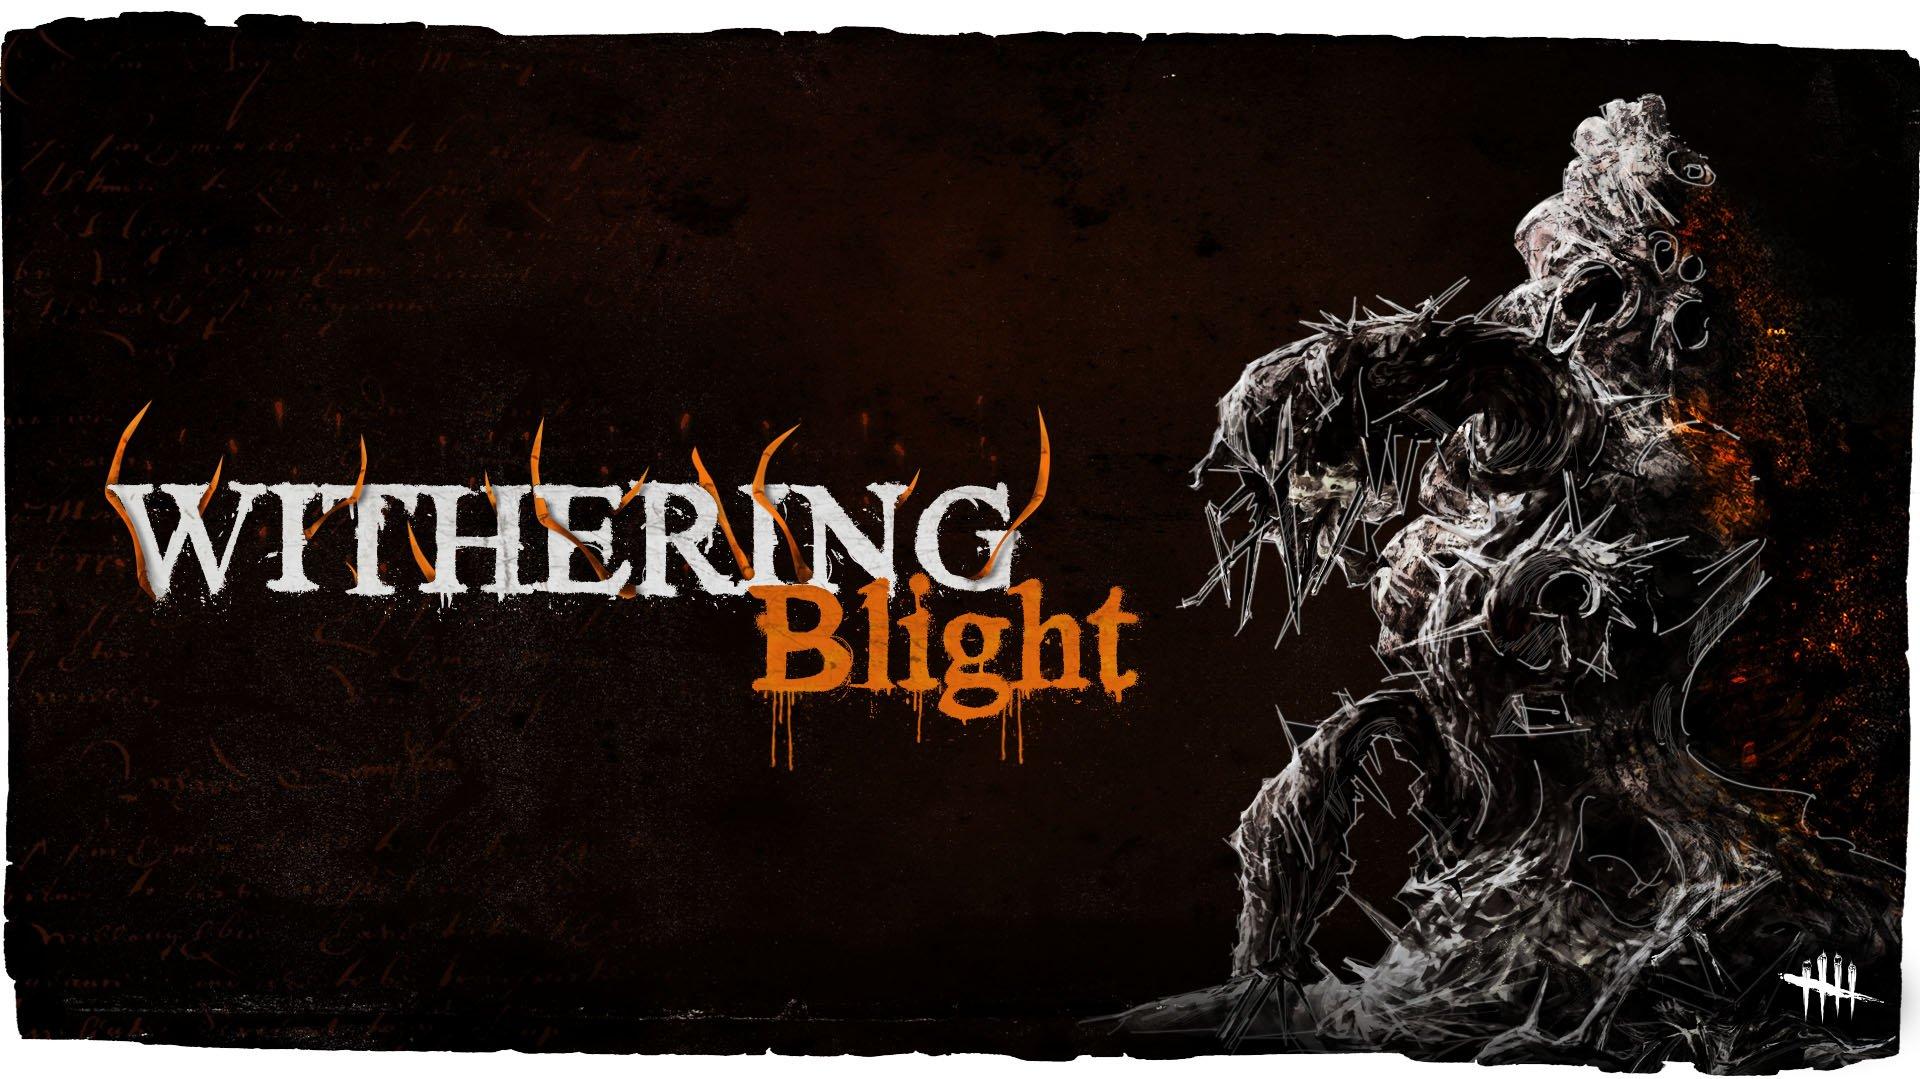 Dead by Daylight on The Withering Blight event is coming